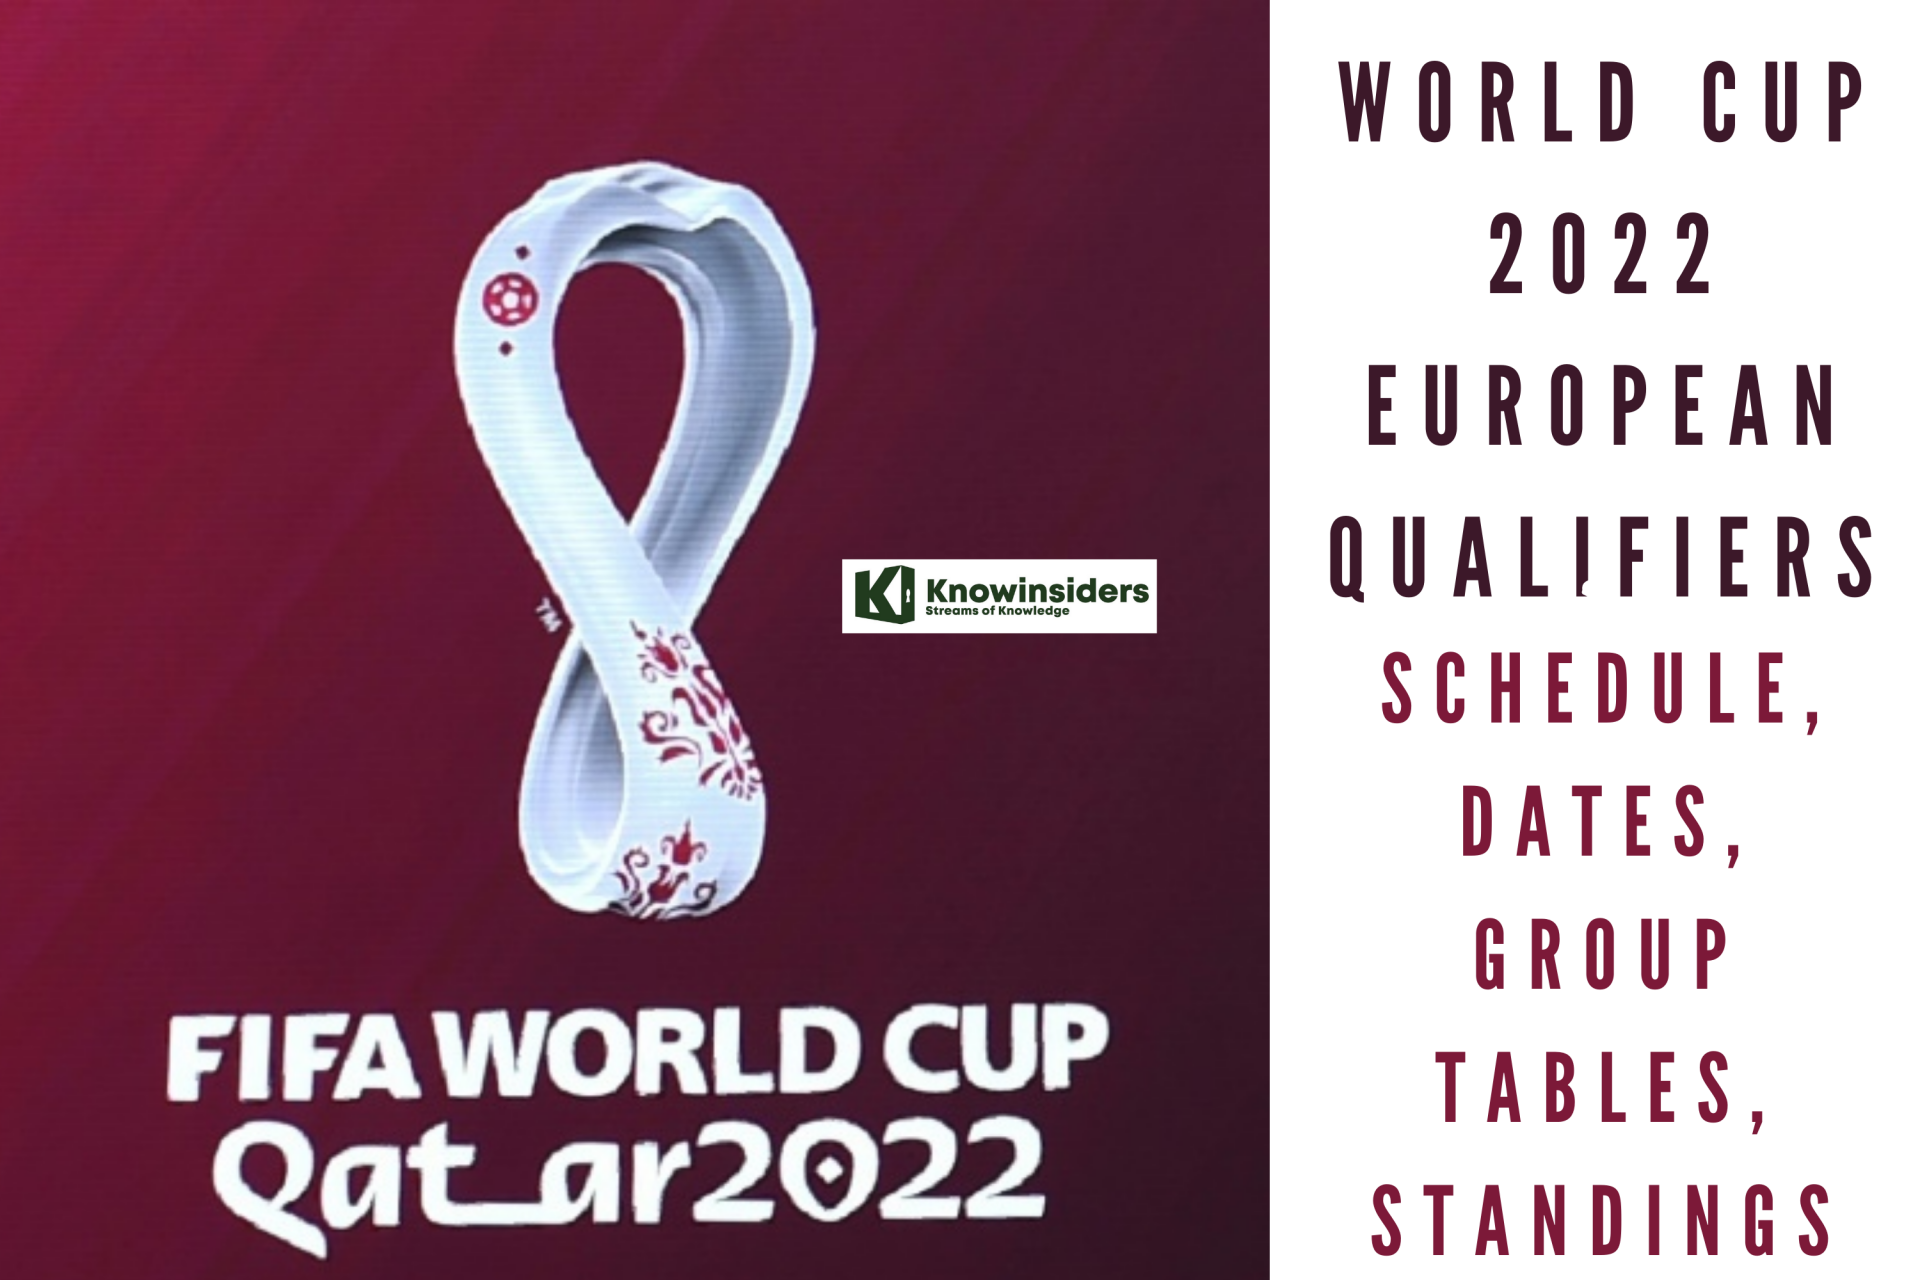 World Cup 2022 European Qualifiers Dates, Schedule, Group Tables